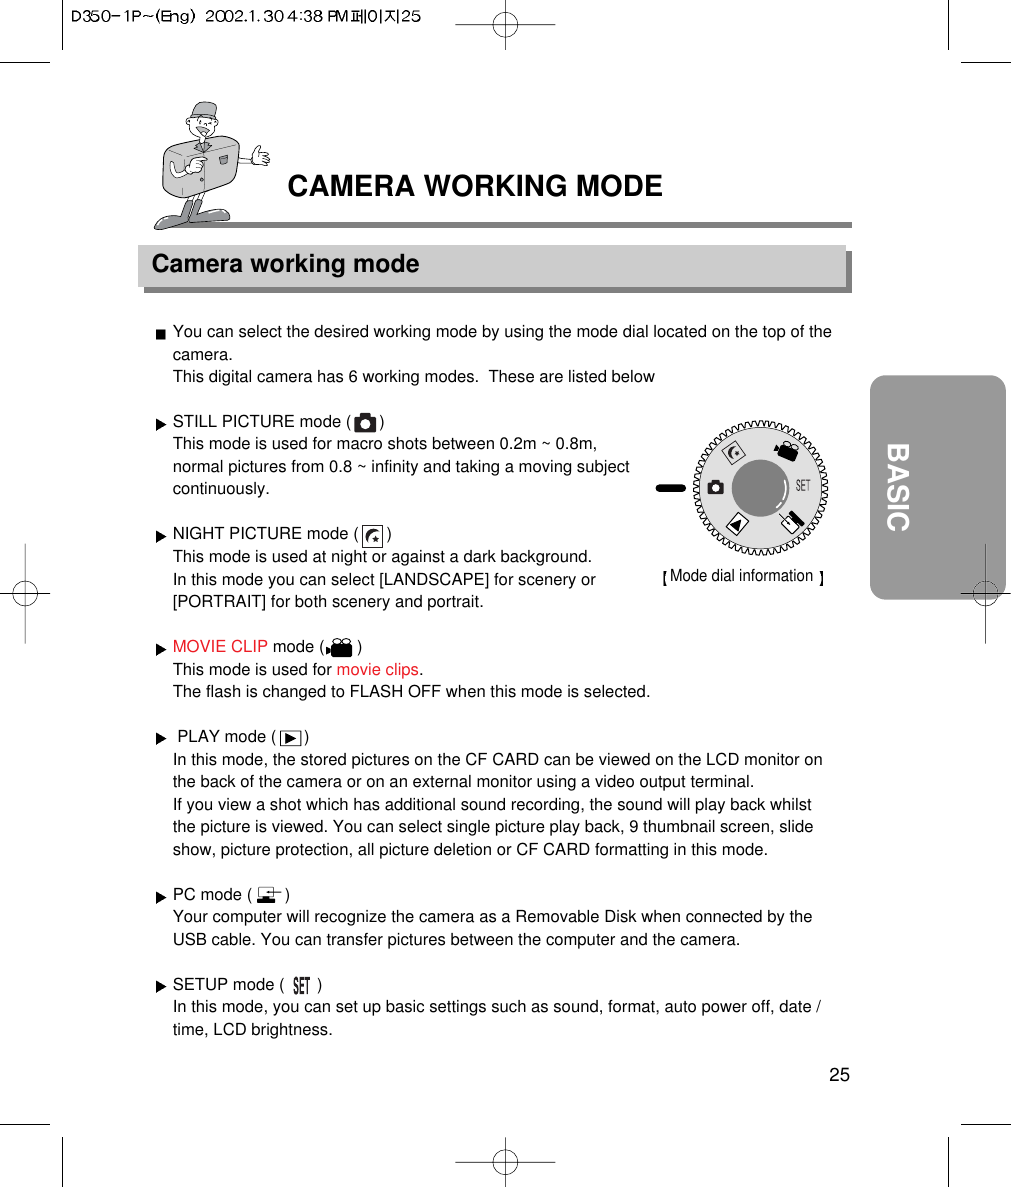 25BASICCAMERA WORKING MODECamera working modeYou can select the desired working mode by using the mode dial located on the top of thecamera.This digital camera has 6 working modes.  These are listed belowSTILL PICTURE mode (      )This mode is used for macro shots between 0.2m ~ 0.8m,normal pictures from 0.8 ~ infinity and taking a moving subjectcontinuously.NIGHT PICTURE mode (      )This mode is used at night or against a dark background. In this mode you can select [LANDSCAPE] for scenery or[PORTRAIT] for both scenery and portrait.MOVIE CLIP mode (       )This mode is used for movie clips.The flash is changed to FLASH OFF when this mode is selected.PLAY mode (      )In this mode, the stored pictures on the CF CARD can be viewed on the LCD monitor onthe back of the camera or on an external monitor using a video output terminal.If you view a shot which has additional sound recording, the sound will play back whilstthe picture is viewed. You can select single picture play back, 9 thumbnail screen, slideshow, picture protection, all picture deletion or CF CARD formatting in this mode.PC mode (       )Your computer will recognize the camera as a Removable Disk when connected by theUSB cable. You can transfer pictures between the computer and the camera.SETUP mode (       )In this mode, you can set up basic settings such as sound, format, auto power off, date /time, LCD brightness.Mode dial information 